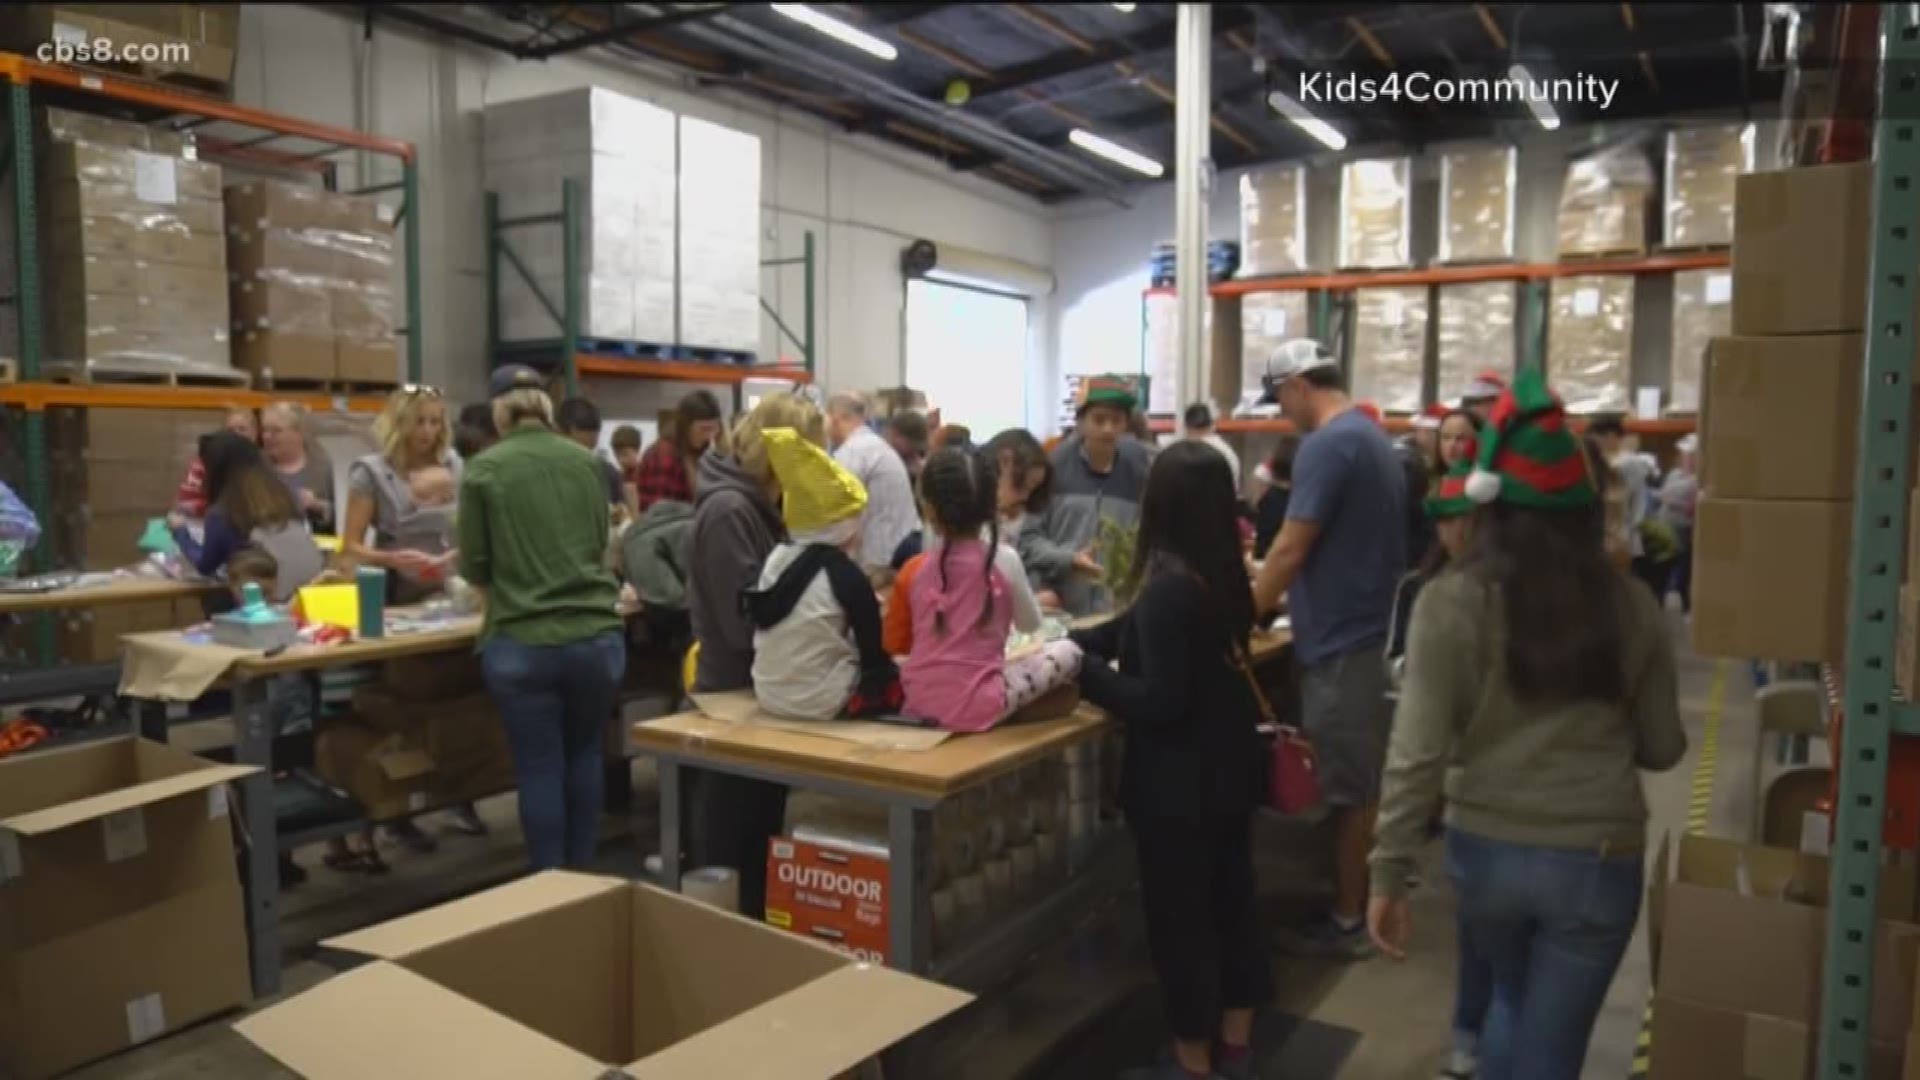 A group of local kids are hoping to help families in need in San Diego and beyond during the Thanksgiving and Christmas holidays.